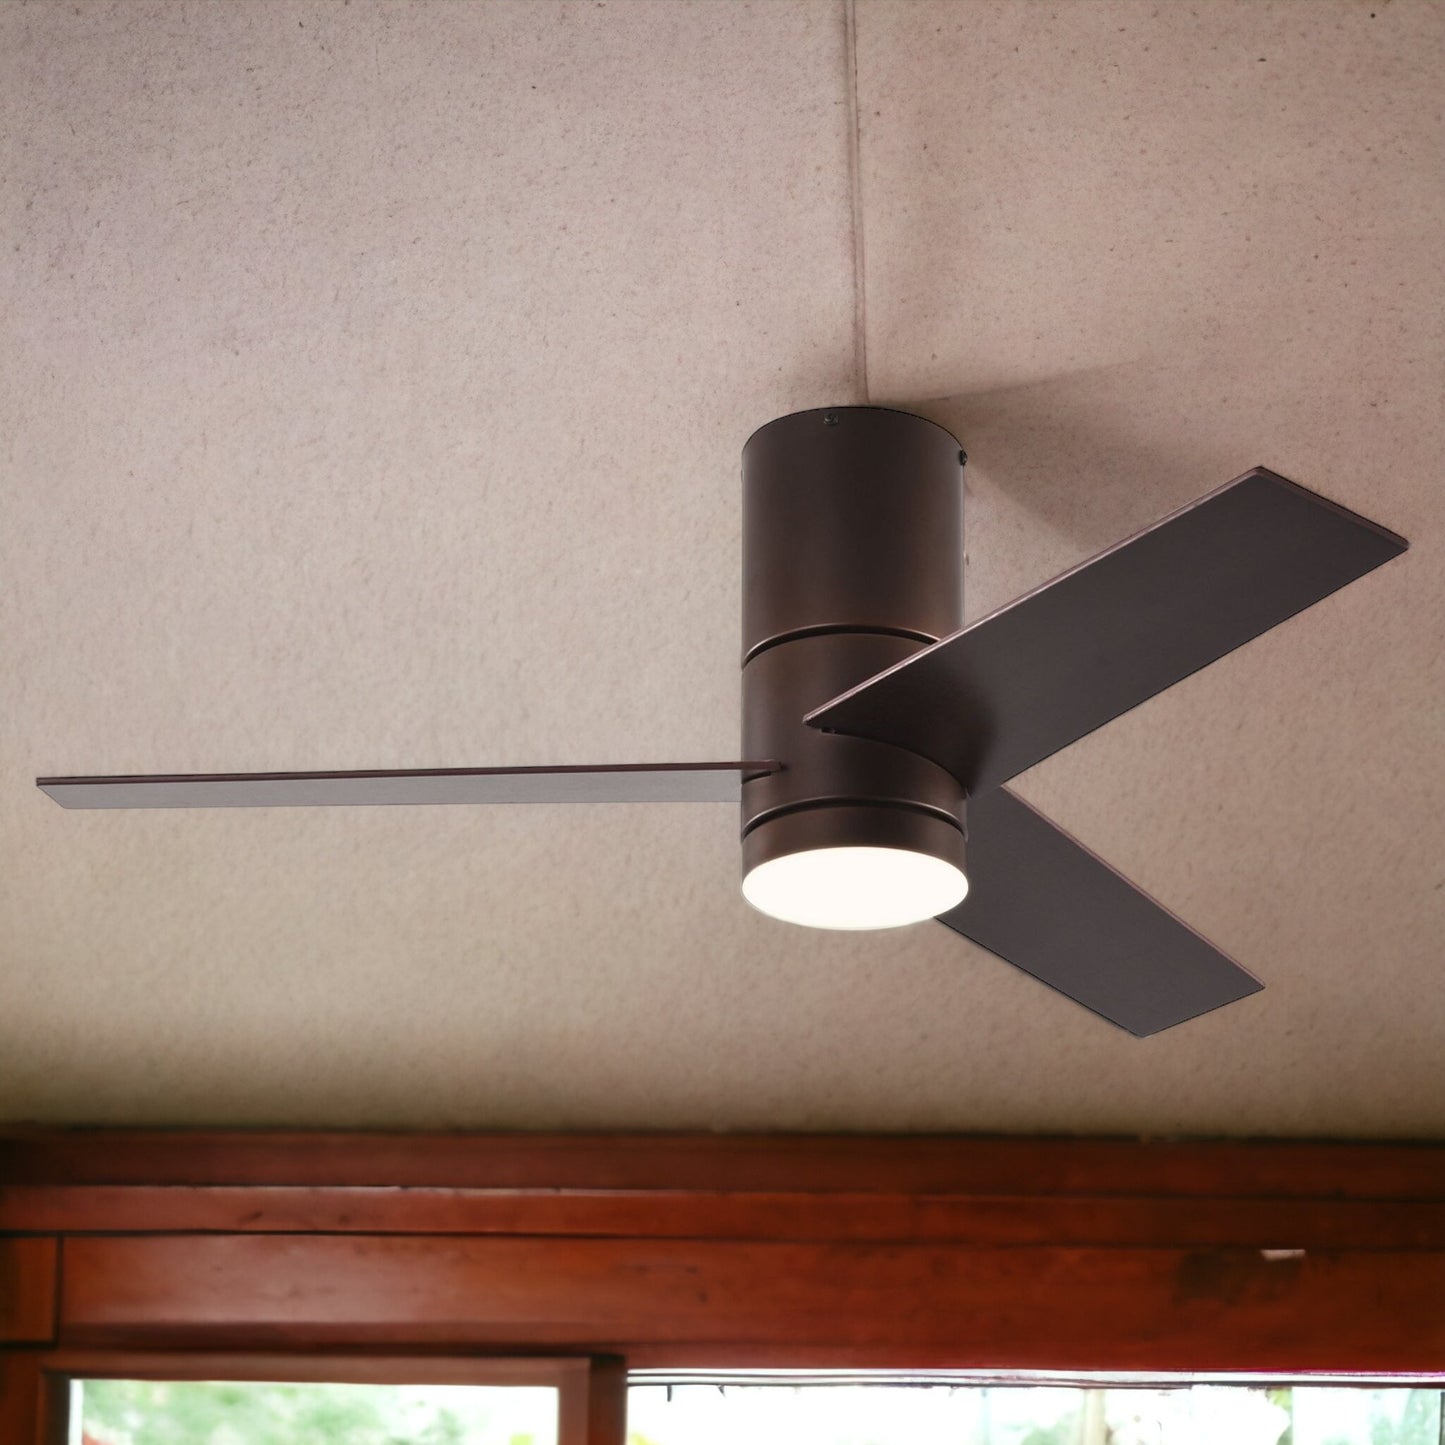 42" Dark Brown Propeller Three Blade Dimmable Remote Control Integrated Light Ceiling Fan